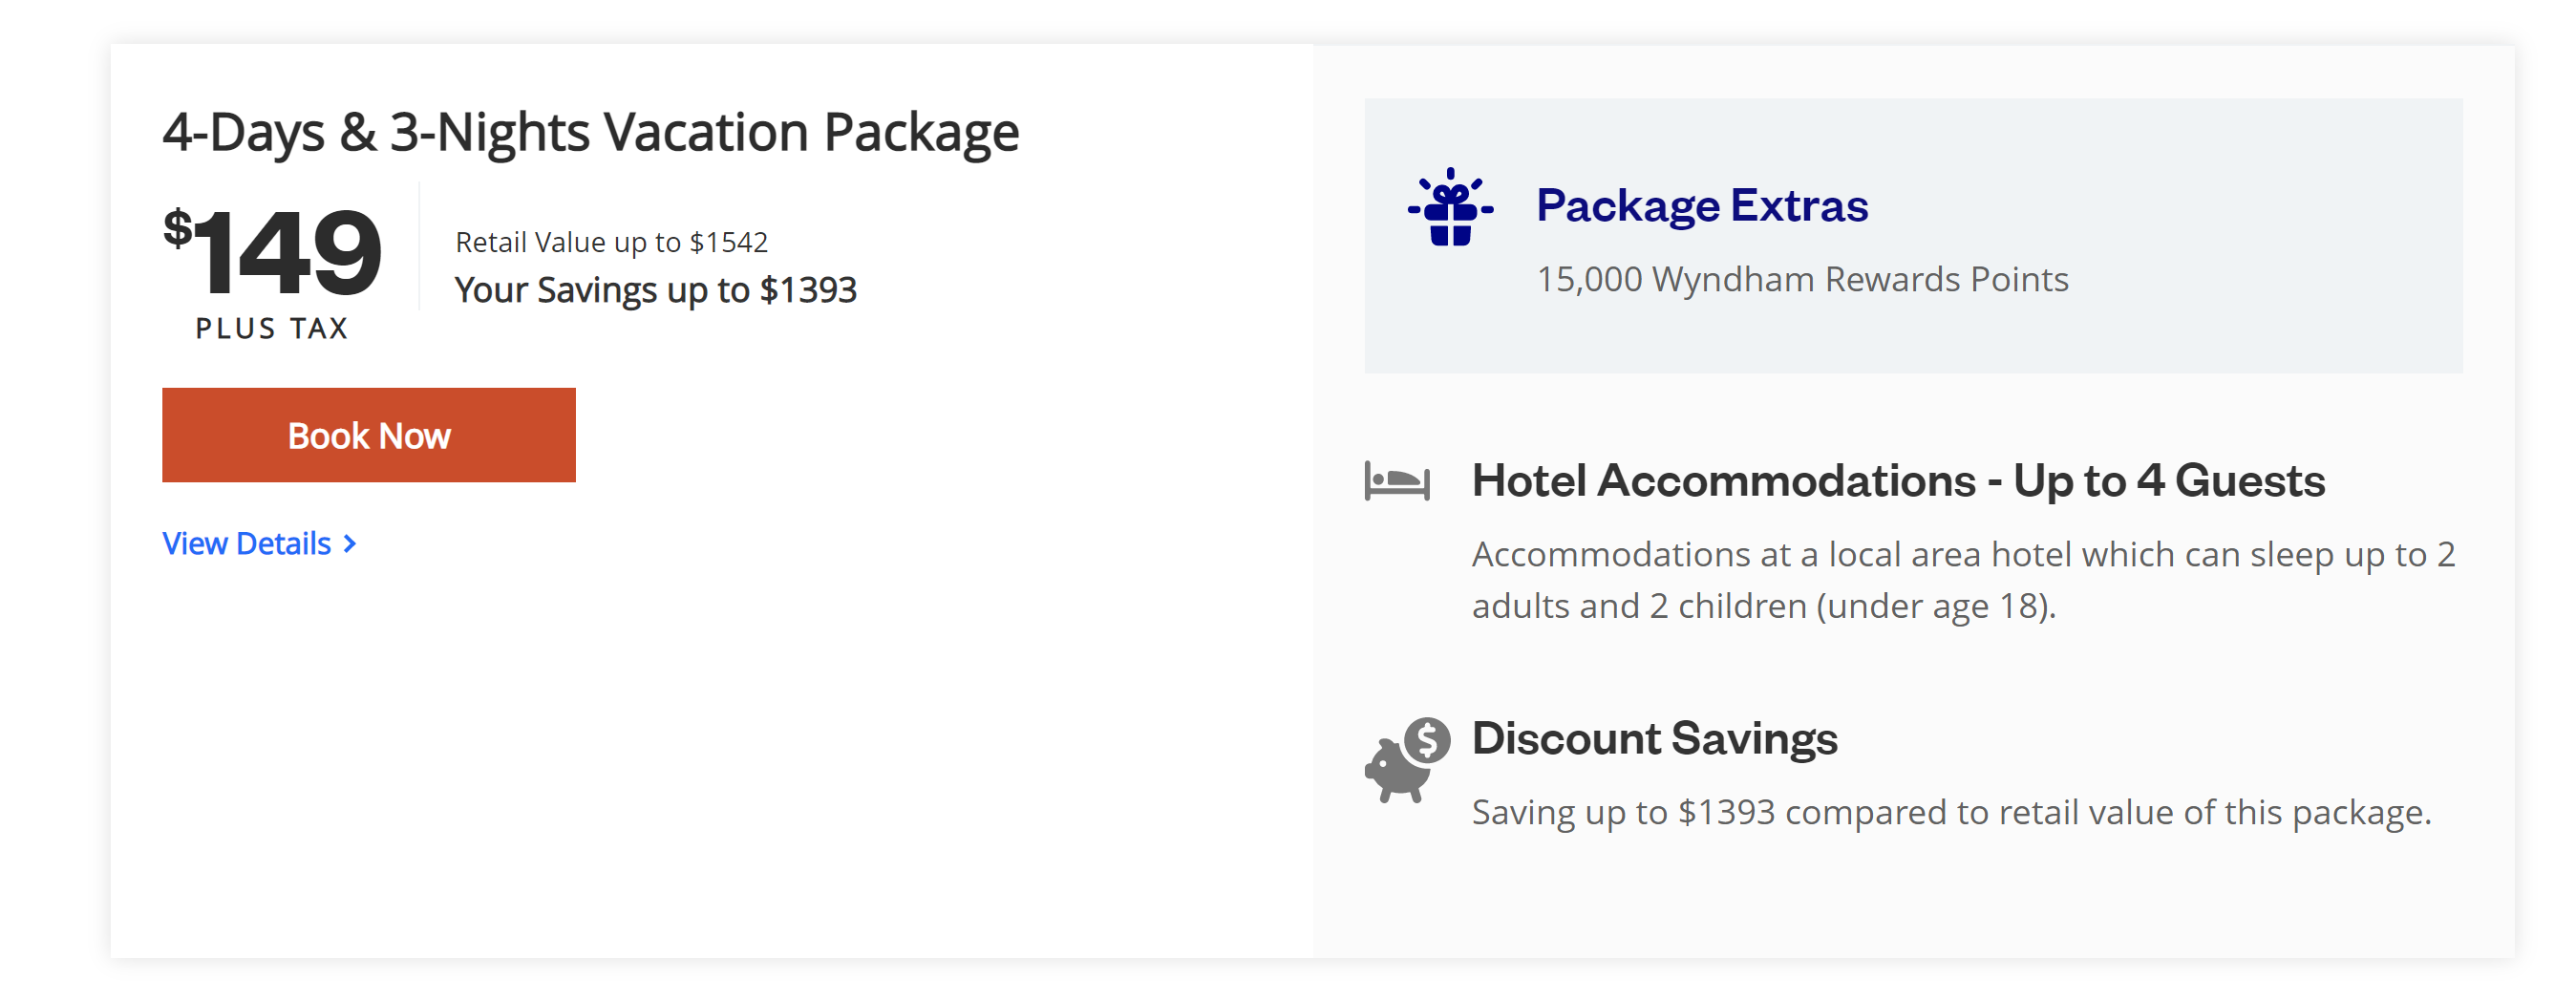 Wyndham timeshare offer: 3 nights + 15K points for $149 or $199 (at a Fairfield?..